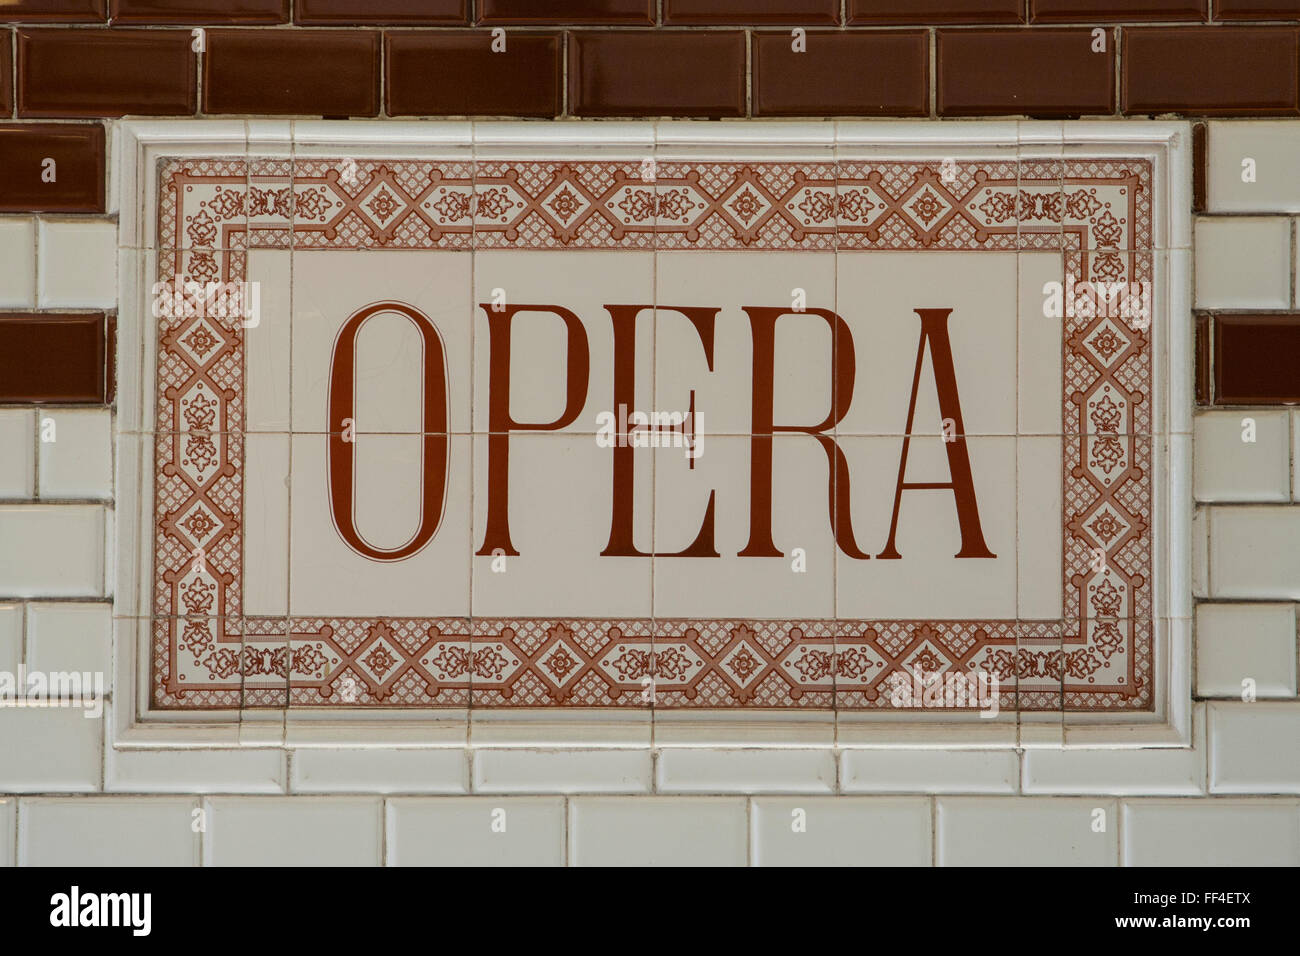 Opera station sign in the Budapest Metro, the world's second oldest underground railway, Budapest, Hungary Stock Photo